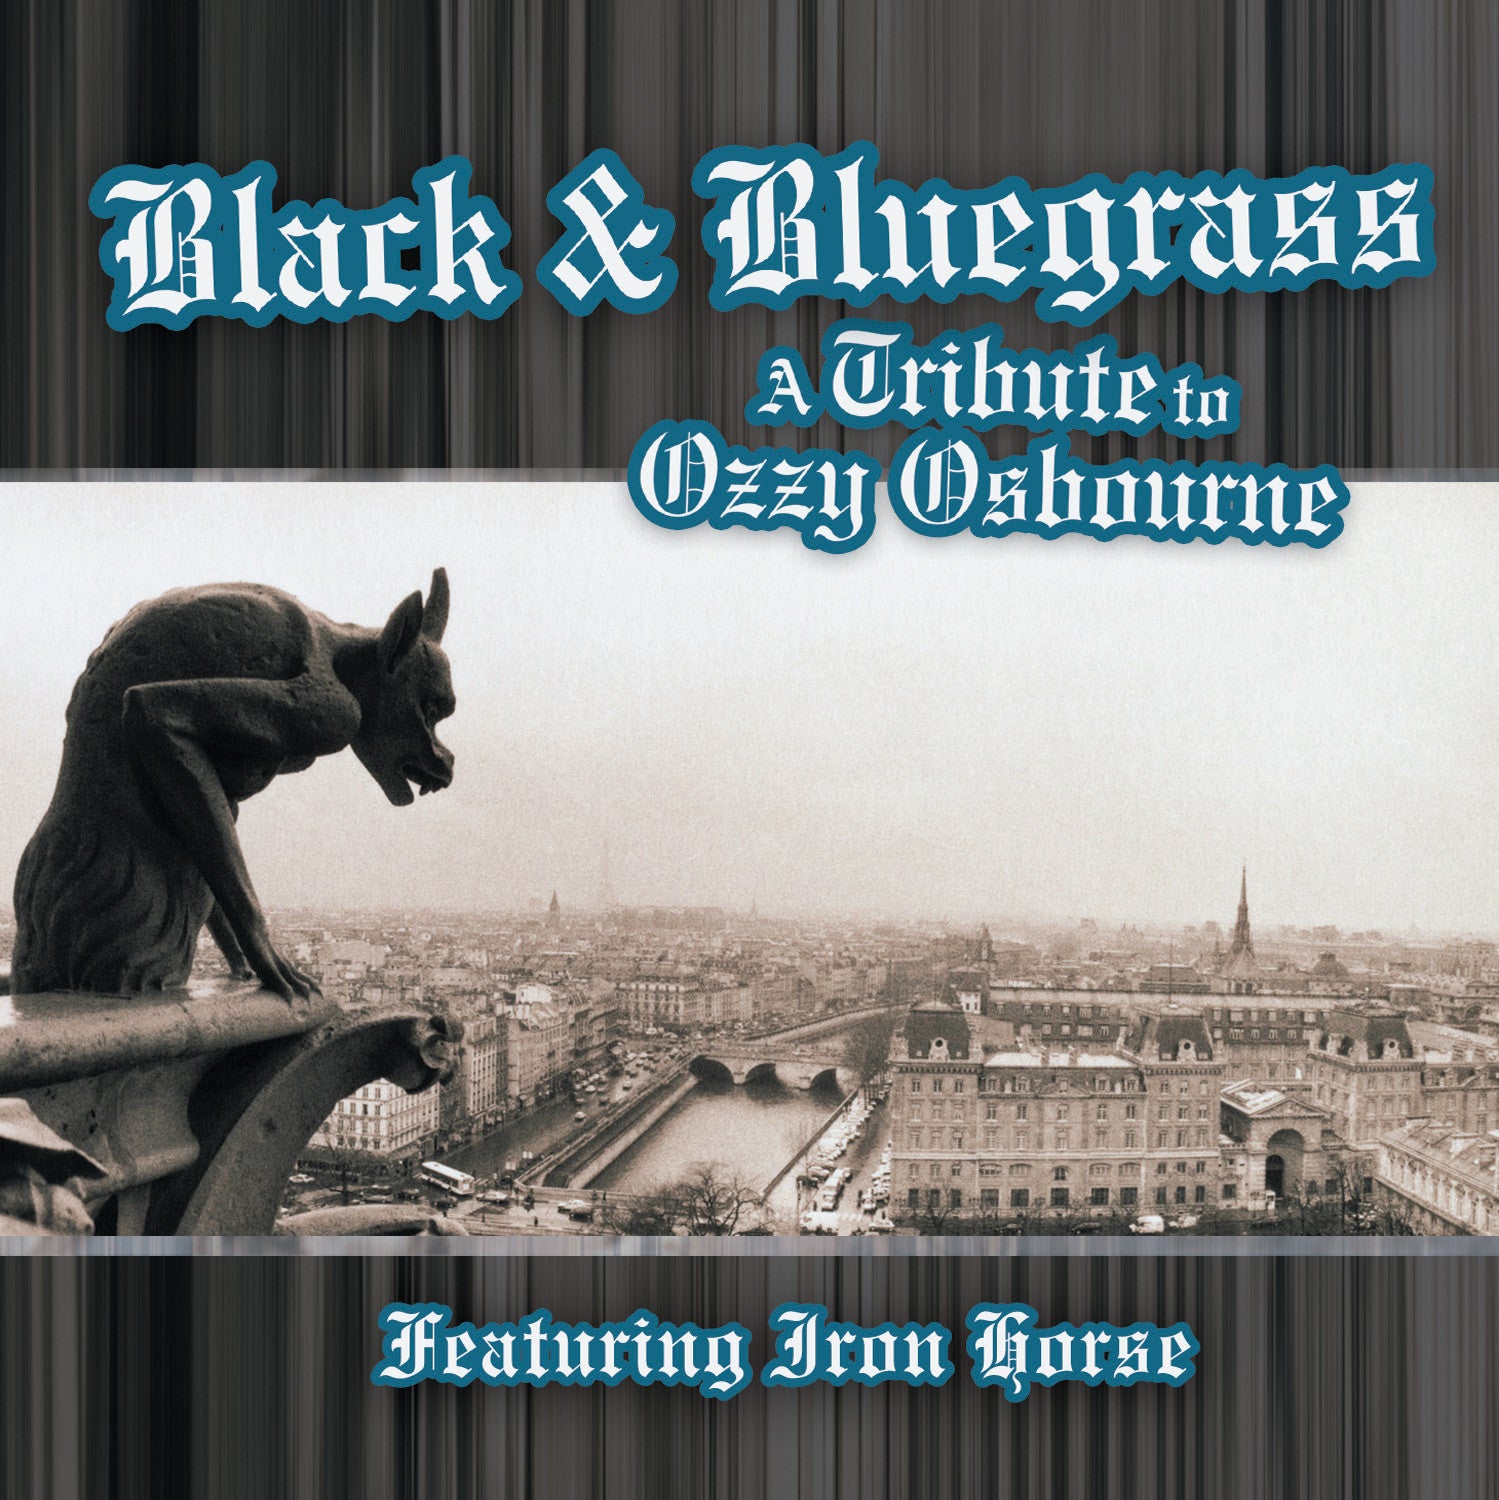 Album art for Back & Bluegrass - Ozzy Osbourne covers featuring Iron Horse